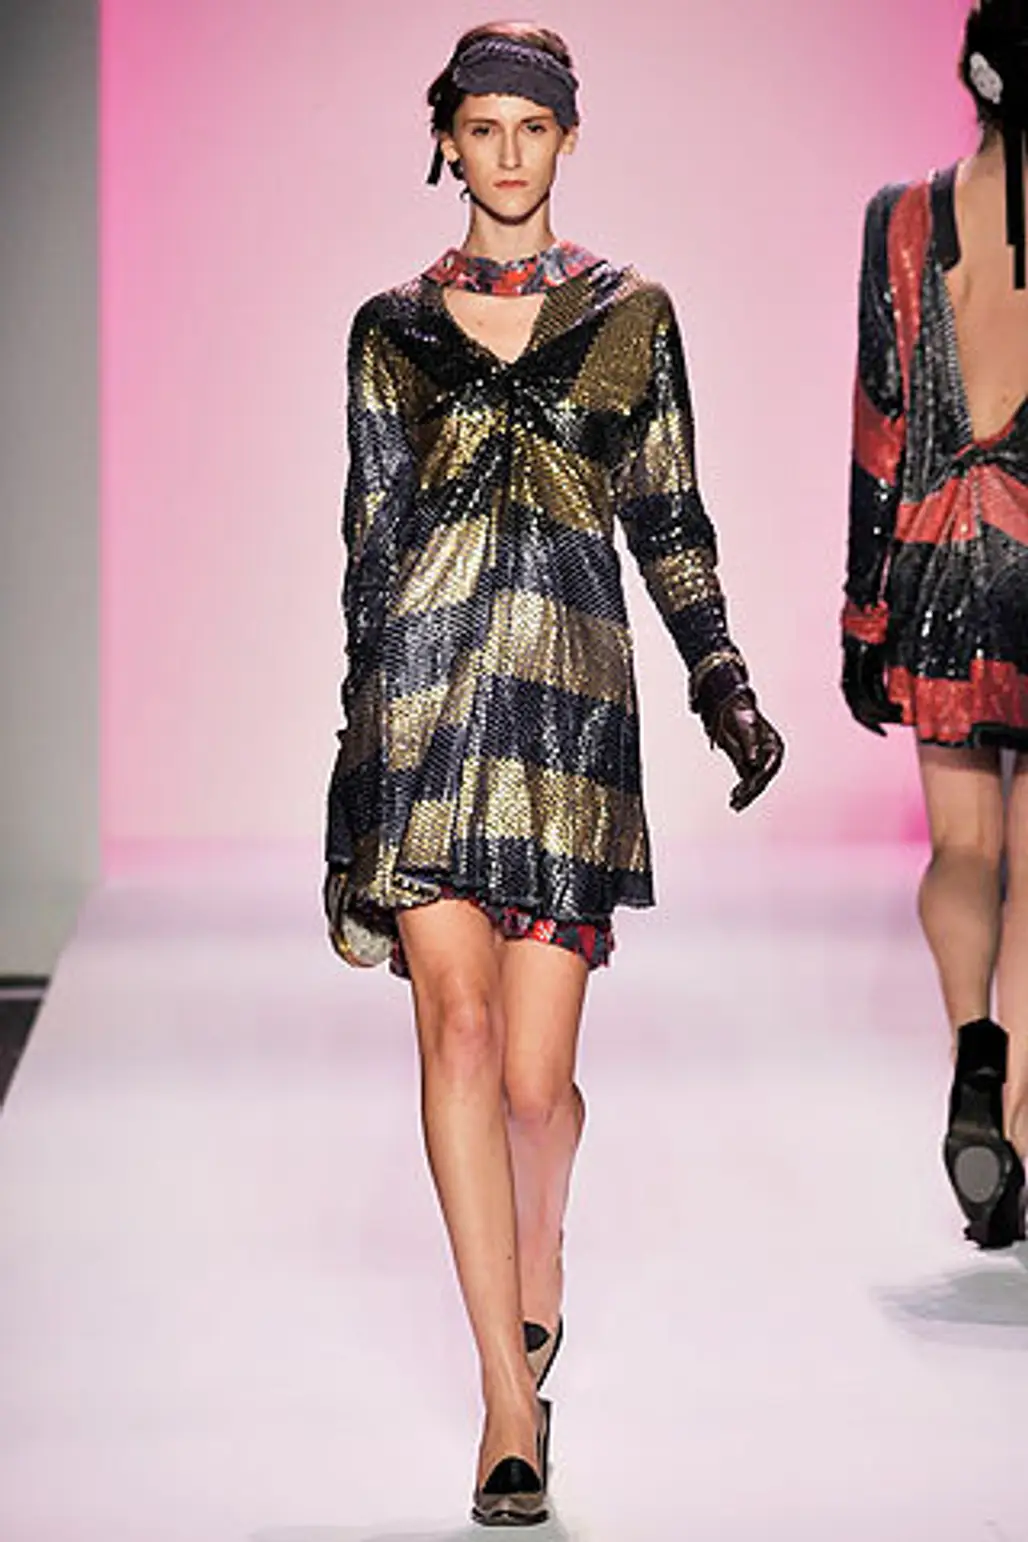 Alexandre Herchcovitch Stripes It Rich Black and Gold Striped Sequin Dress